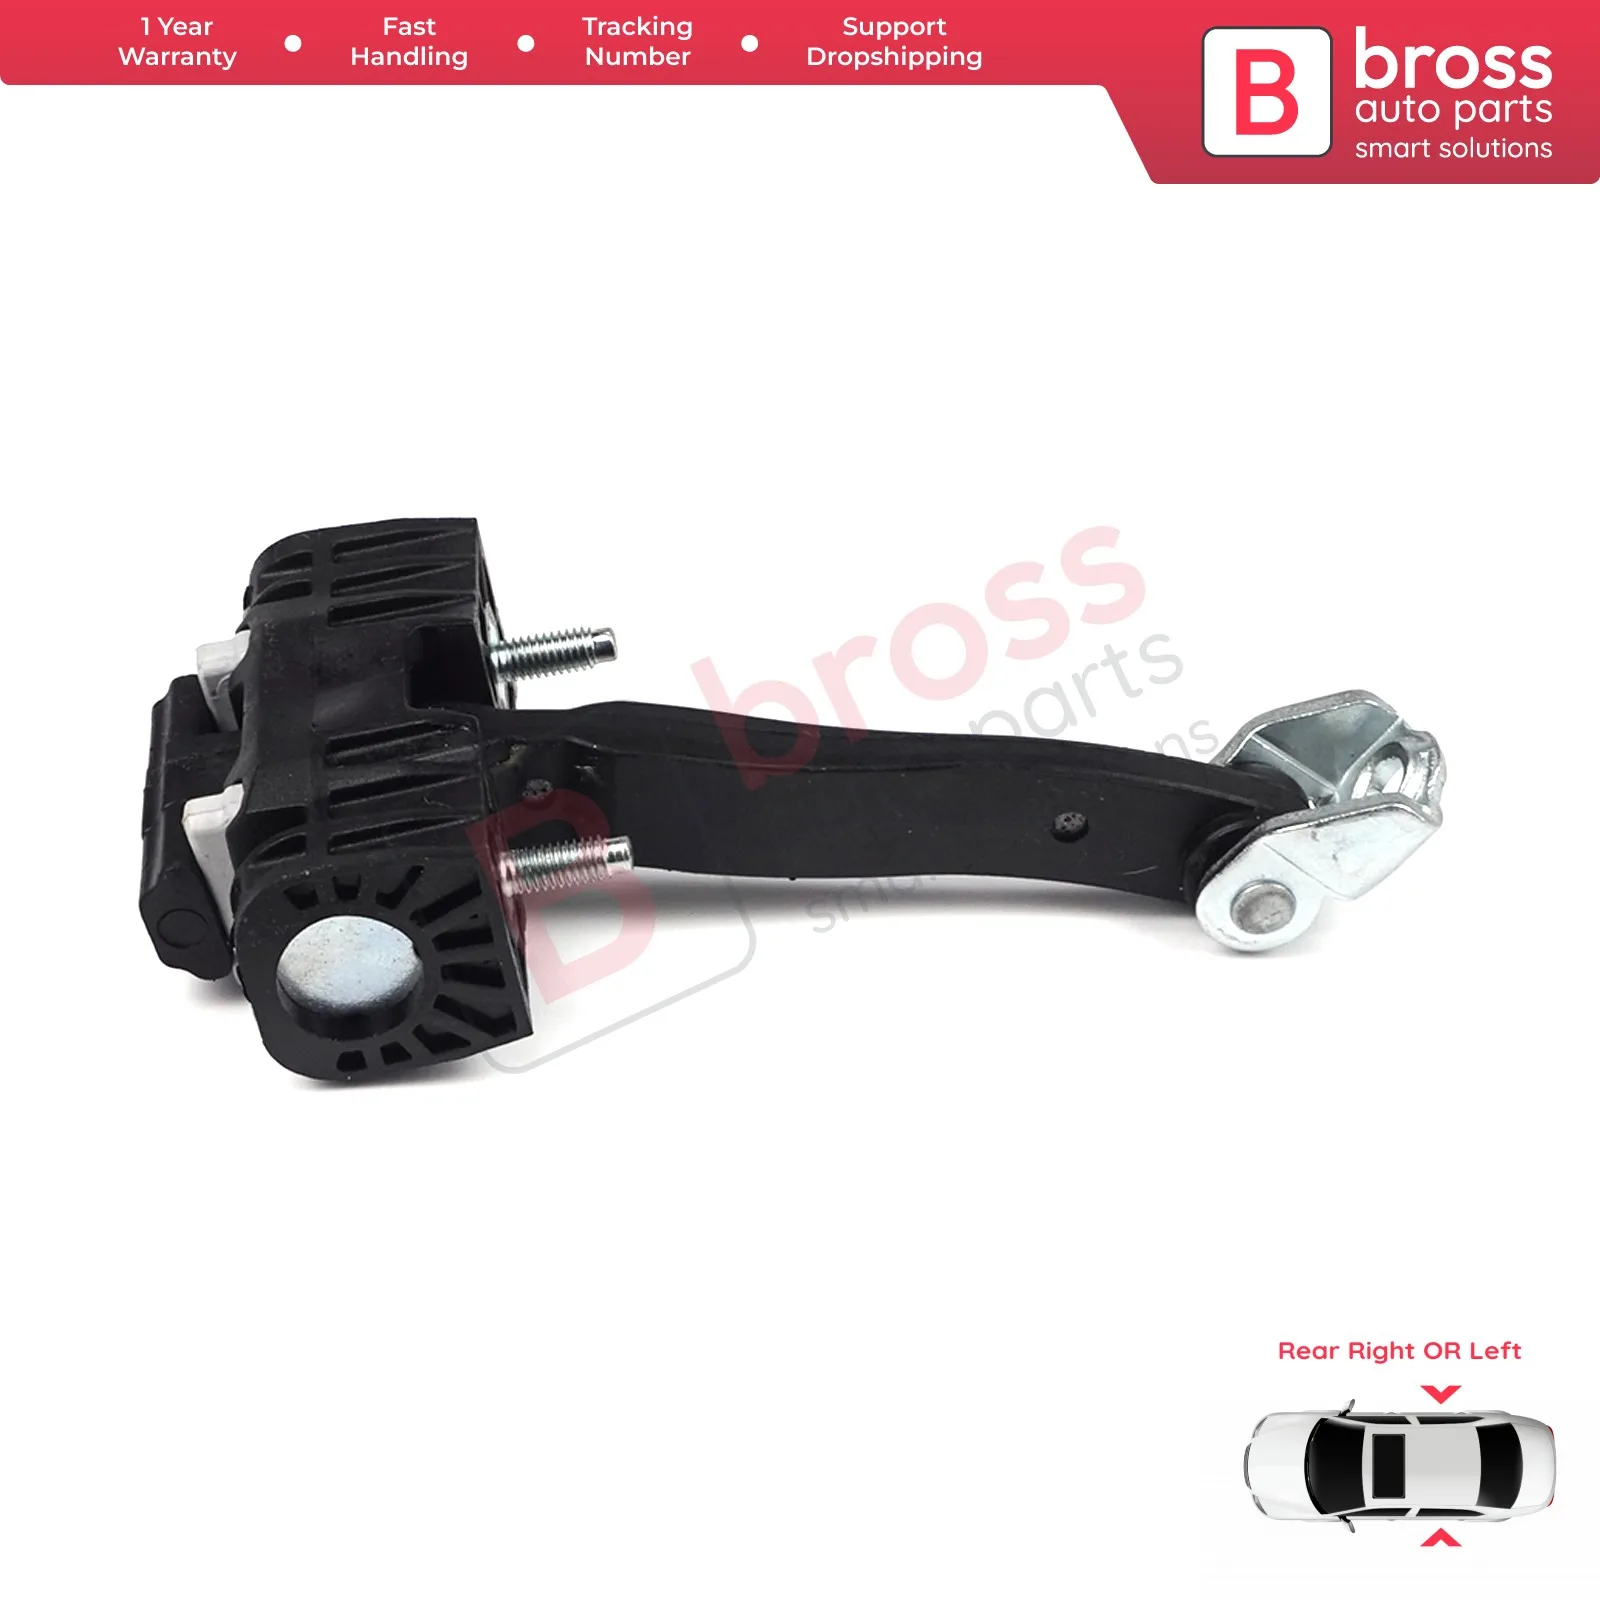 

Bross Auto Parts BDP720 Rear Door Hinge Stop Check Strap Limiter 5160252; 13107851 for Vauxhall Astra H 2004-2009 Free Shipment